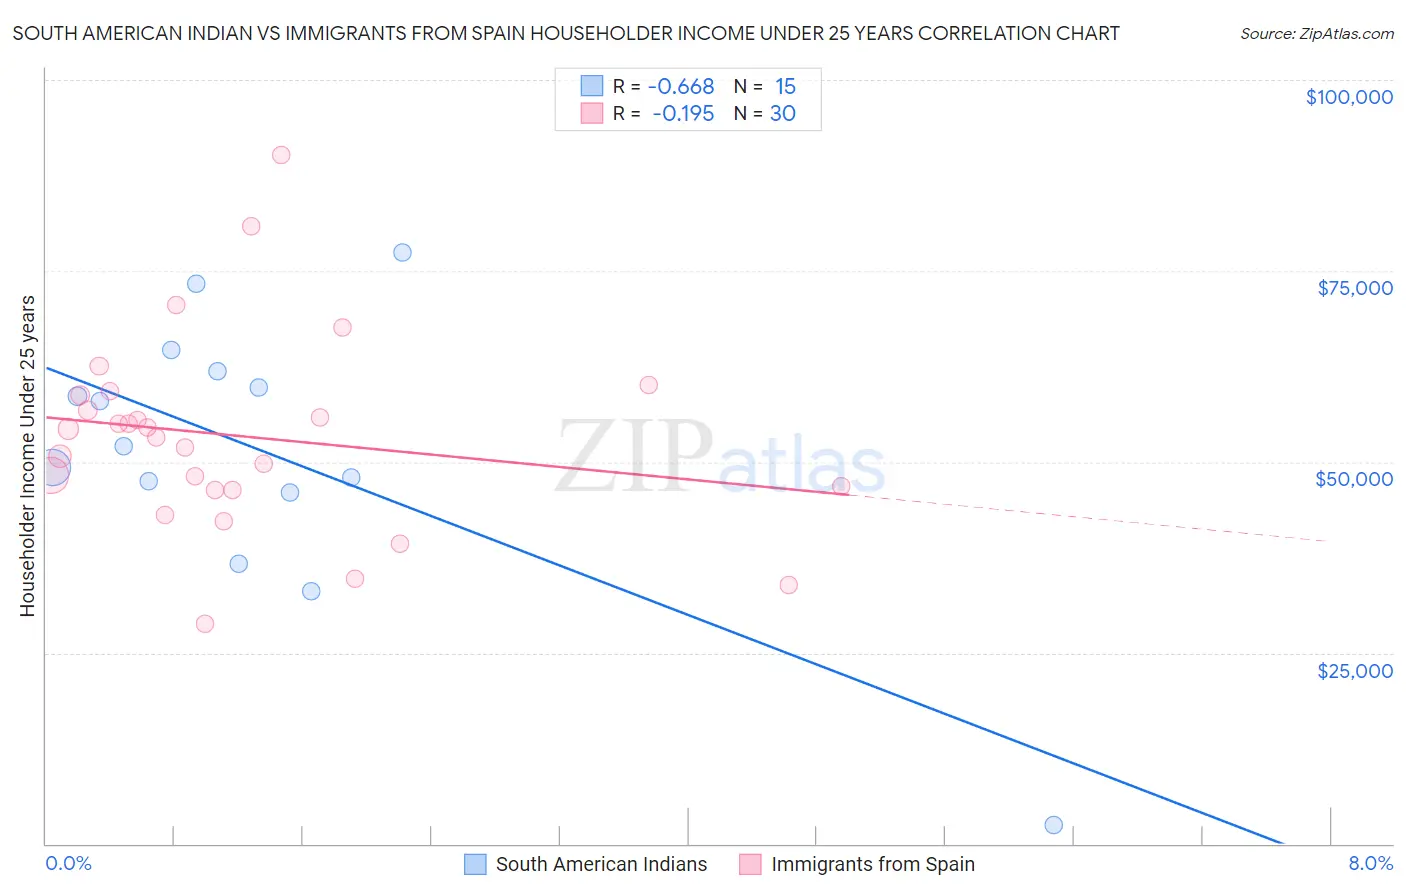 South American Indian vs Immigrants from Spain Householder Income Under 25 years